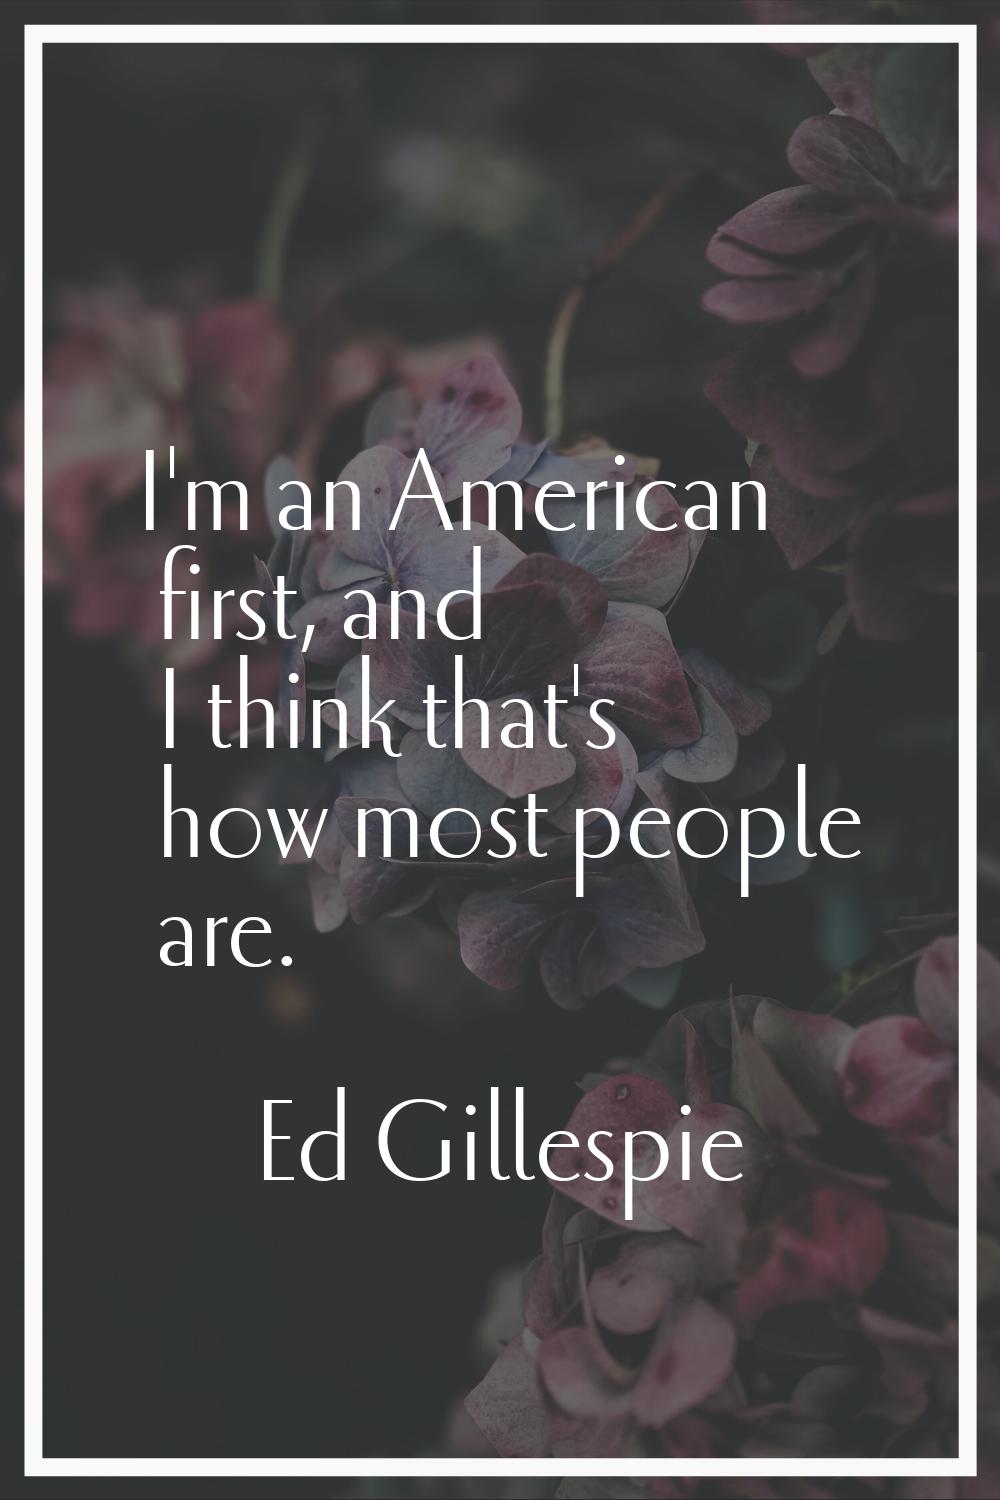 I'm an American first, and I think that's how most people are.